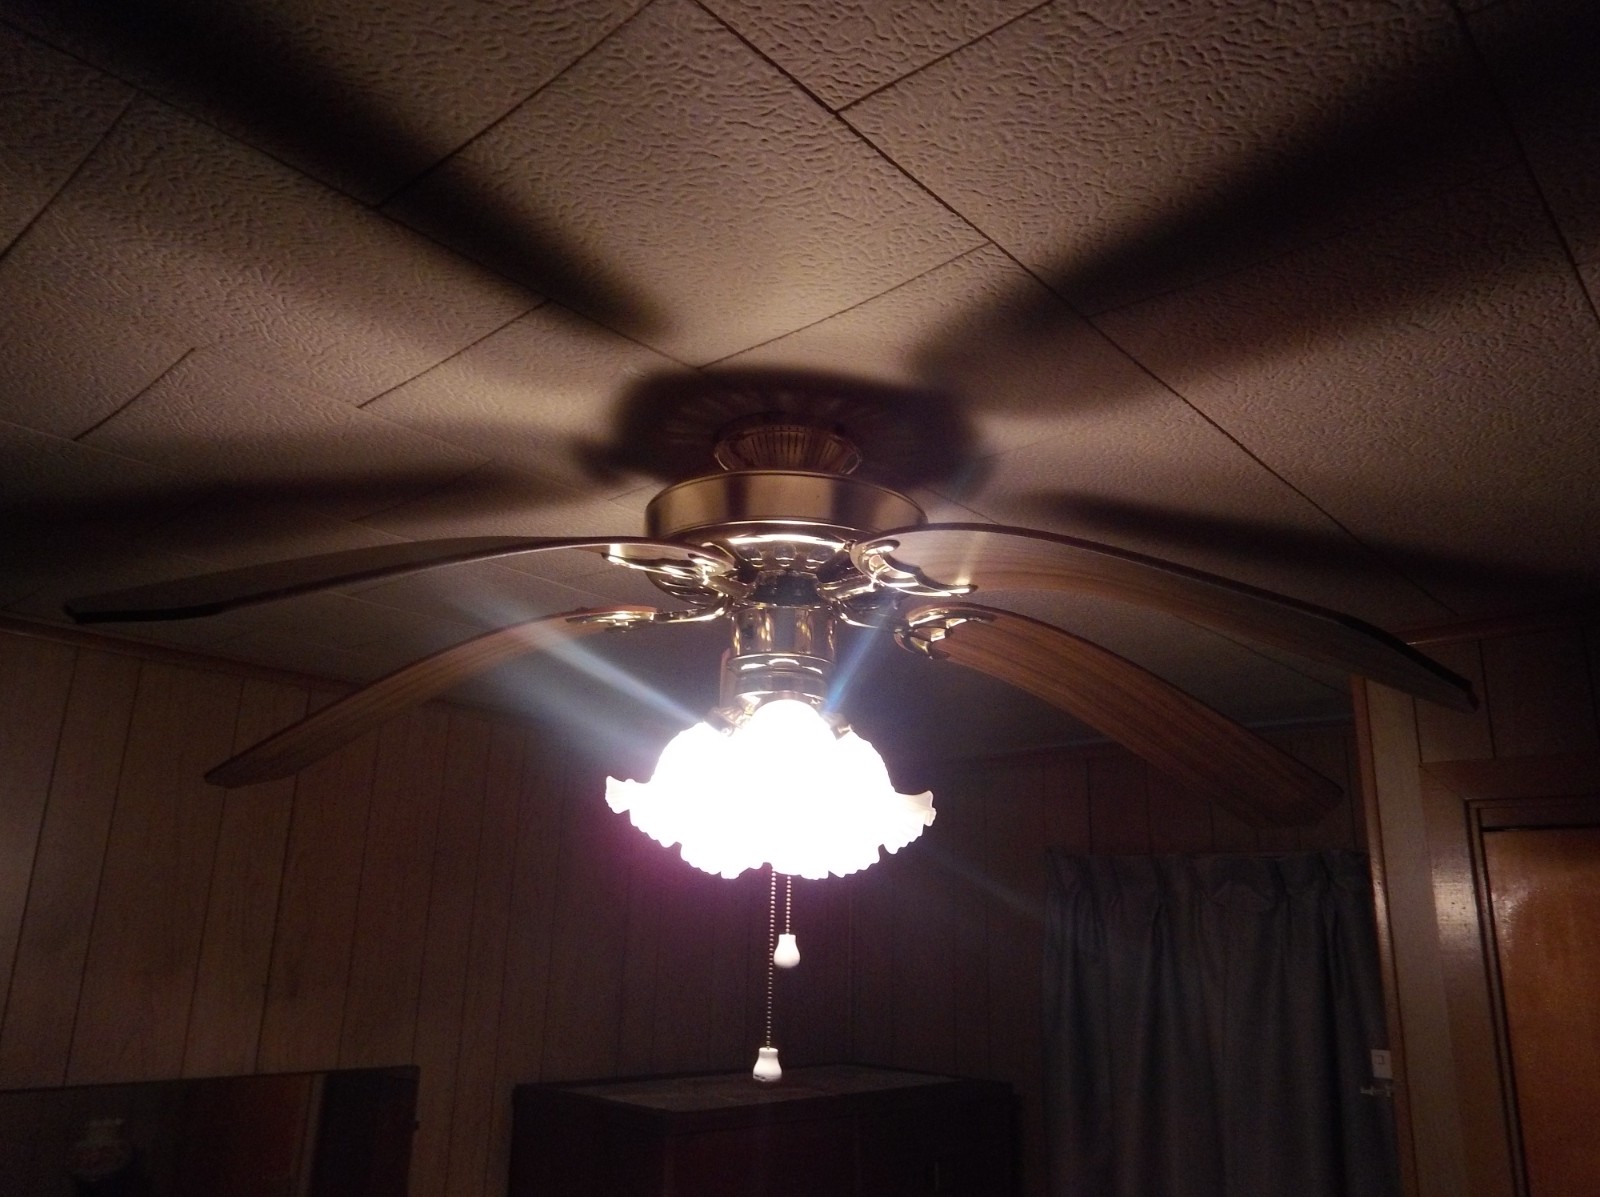 Affected ceiling fan after a severe water loss.